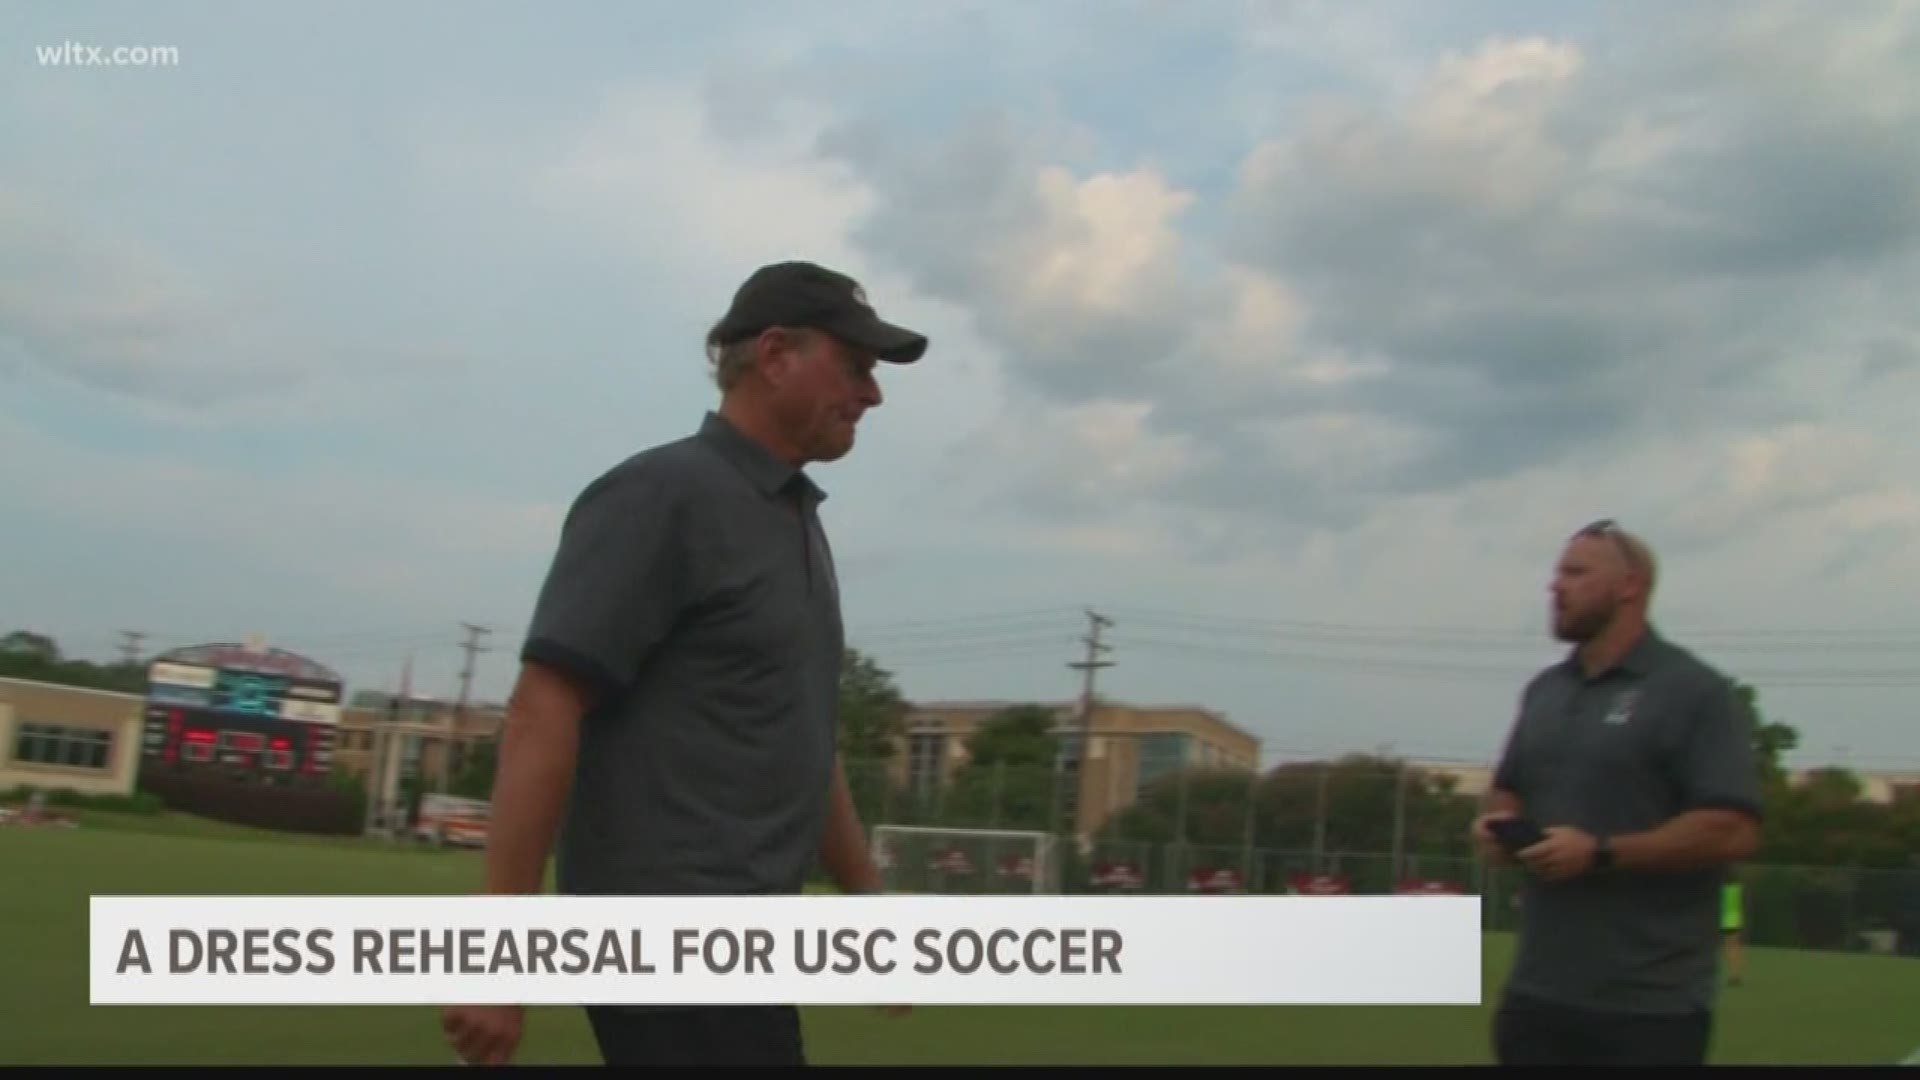 USC head men's soccer coach Mark Berson has been in charge of the Gamecock program since the beginning. His desire to compete and win hasn't wavered in 41 years.